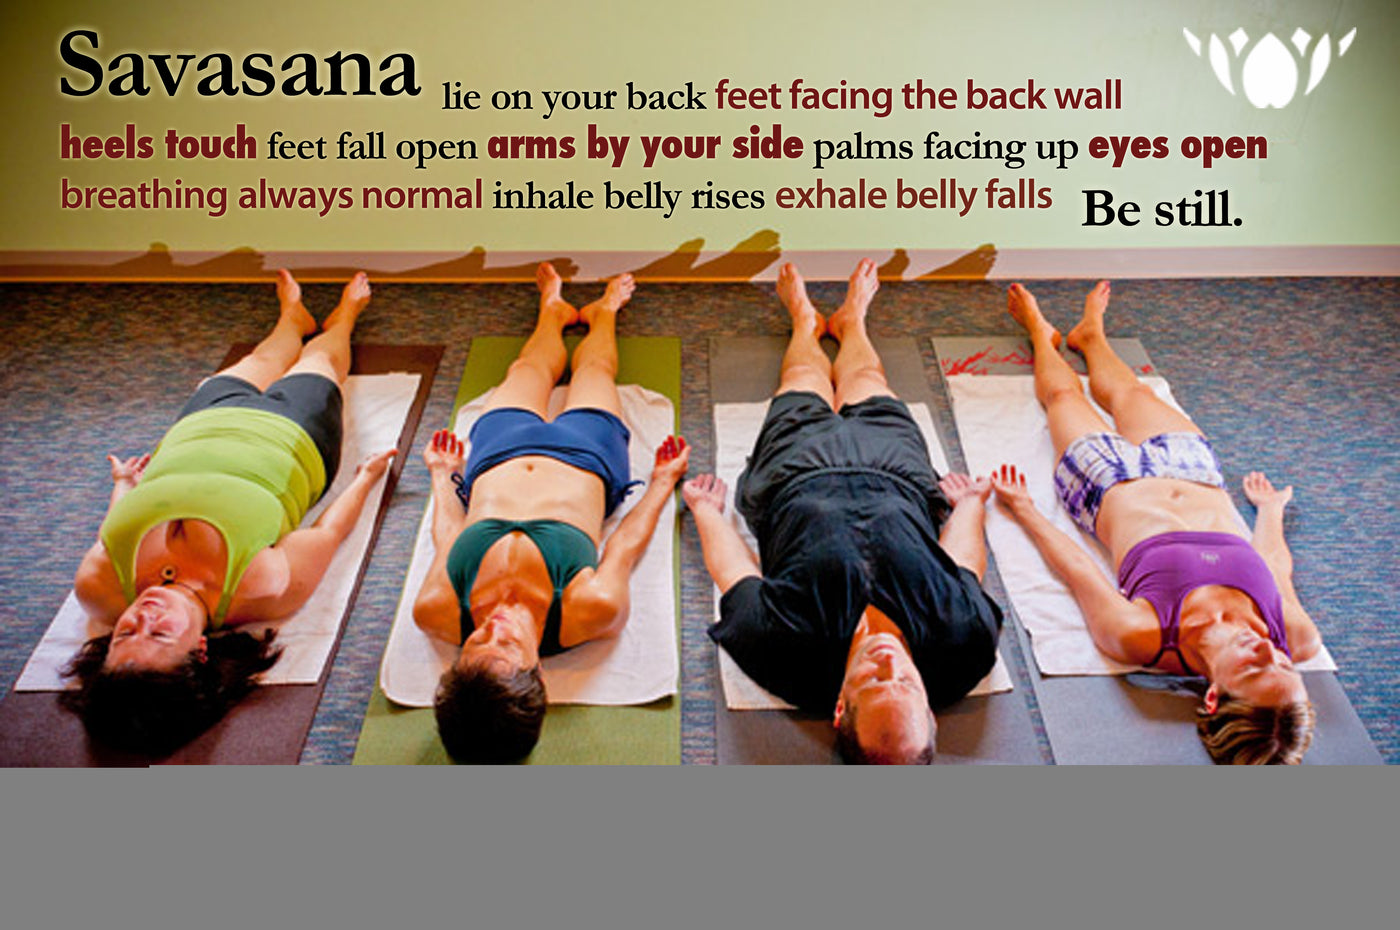 Corpse Pose: How to Properly Rest in Savasana - Yoga Journal